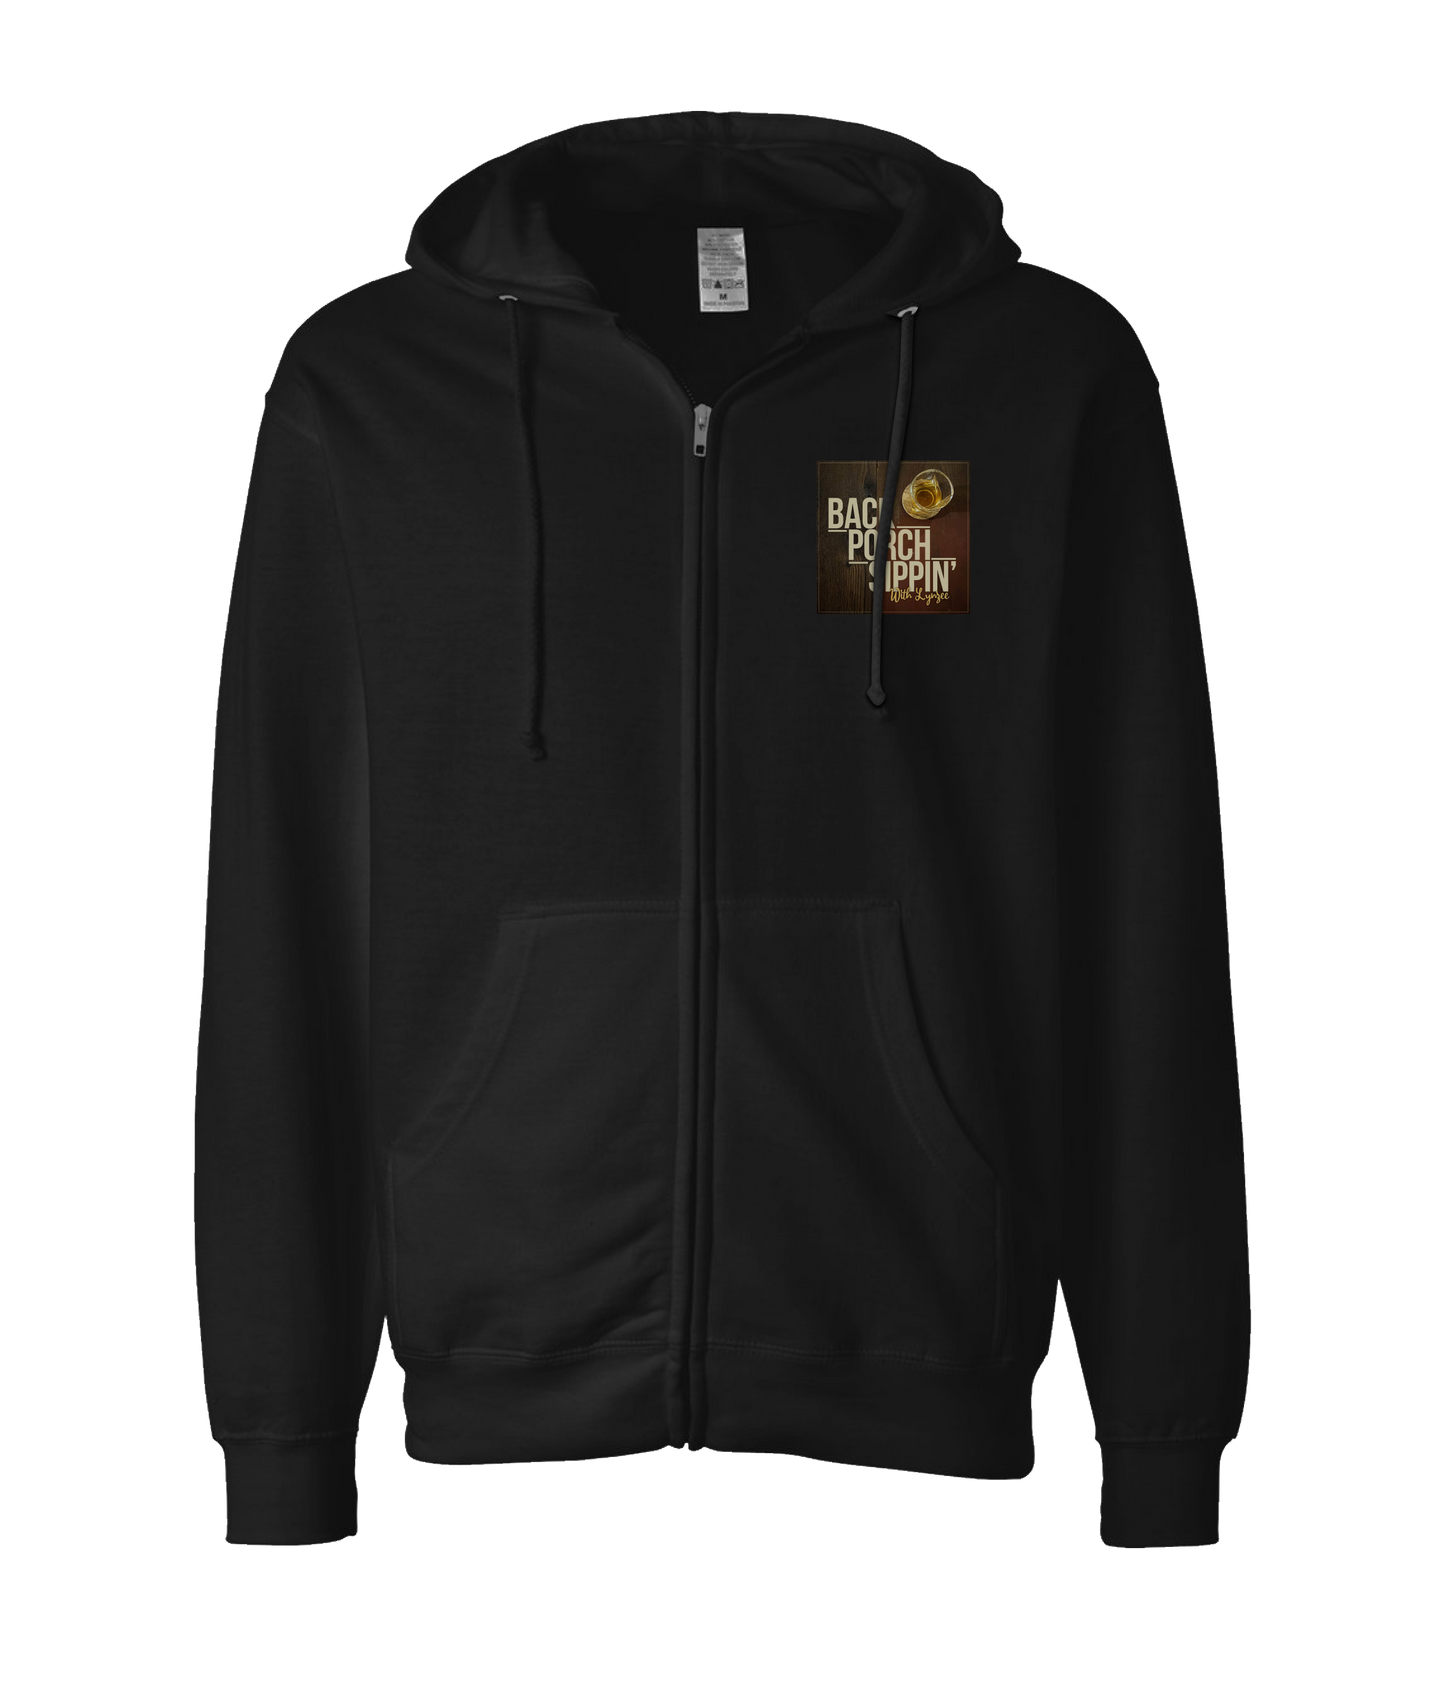 Back Porch Sippin' Podcast - Logo w/Image - Black Zip Up Hoodie